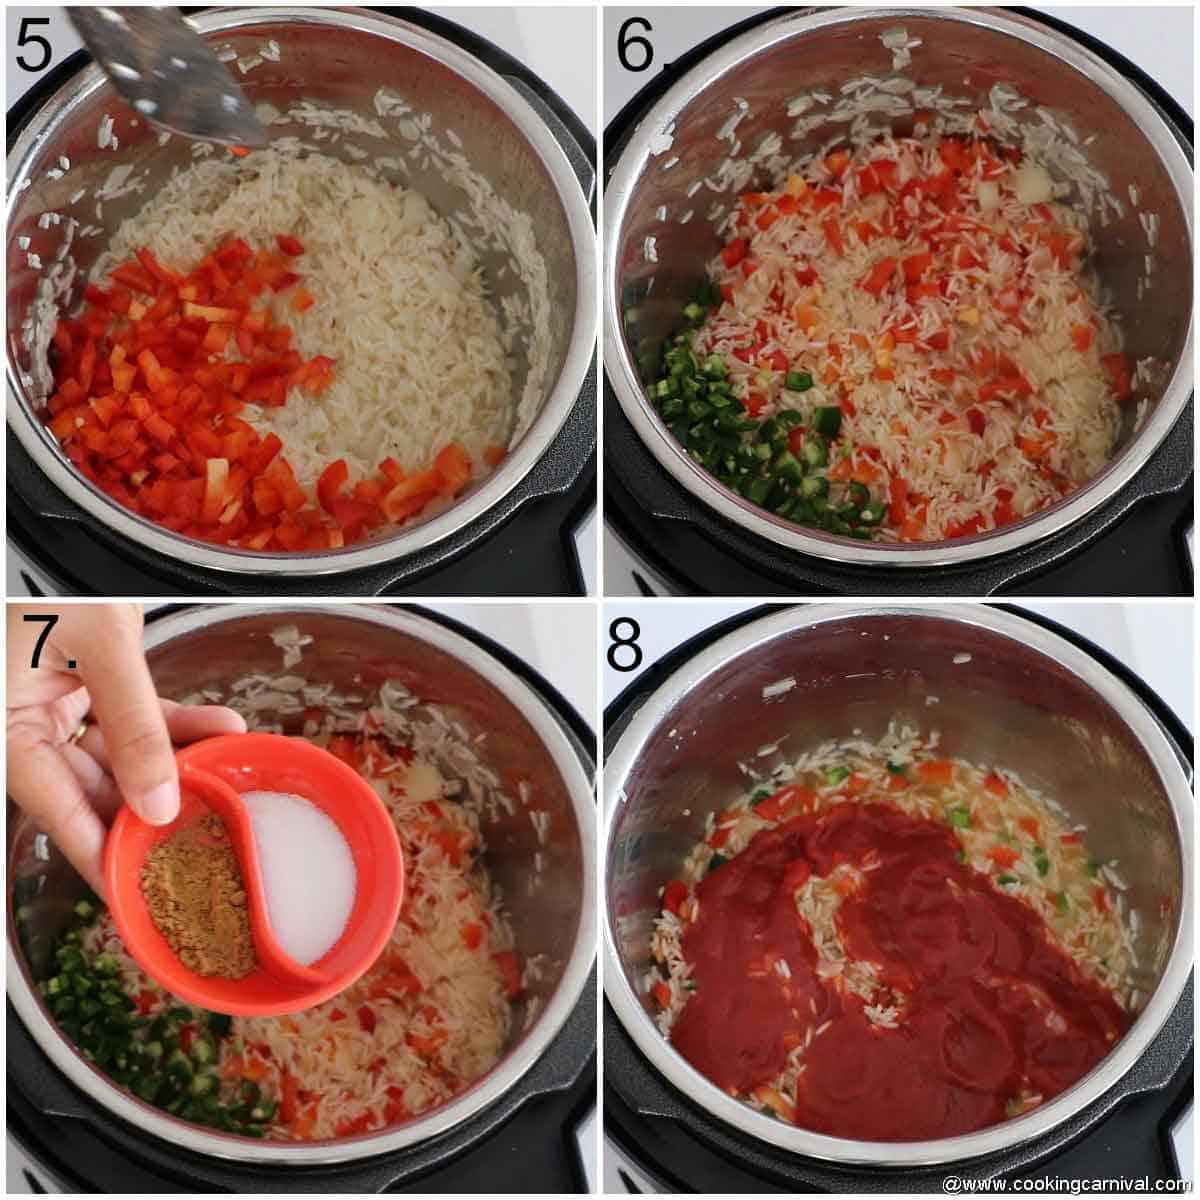 Adding red bellpepper, jalapenos, cumin powder and tomato sauce in instant pot